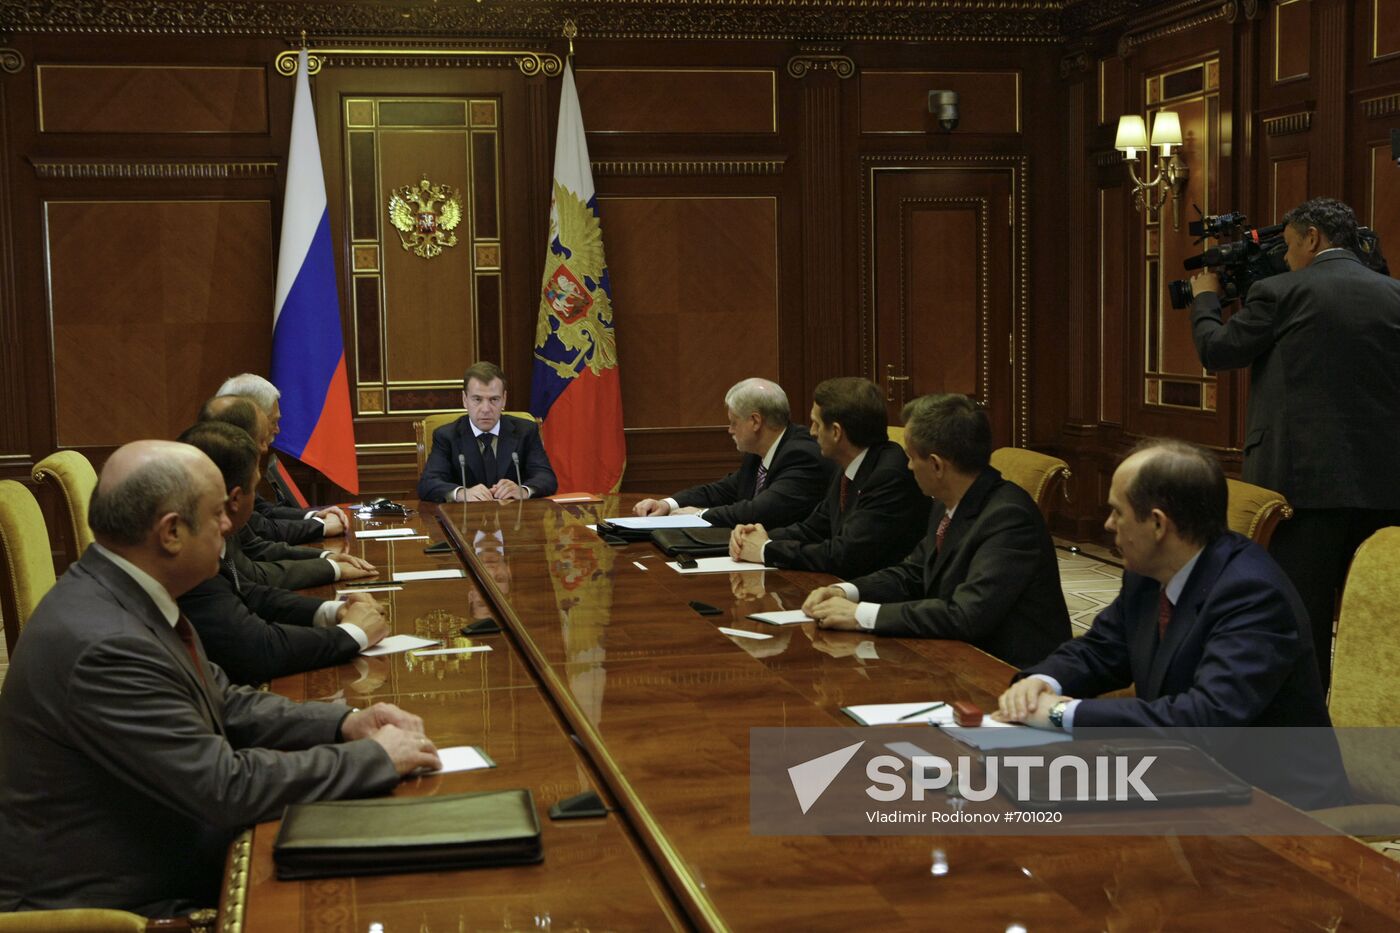 D.Mevedev holds meeting with Russian Security Council